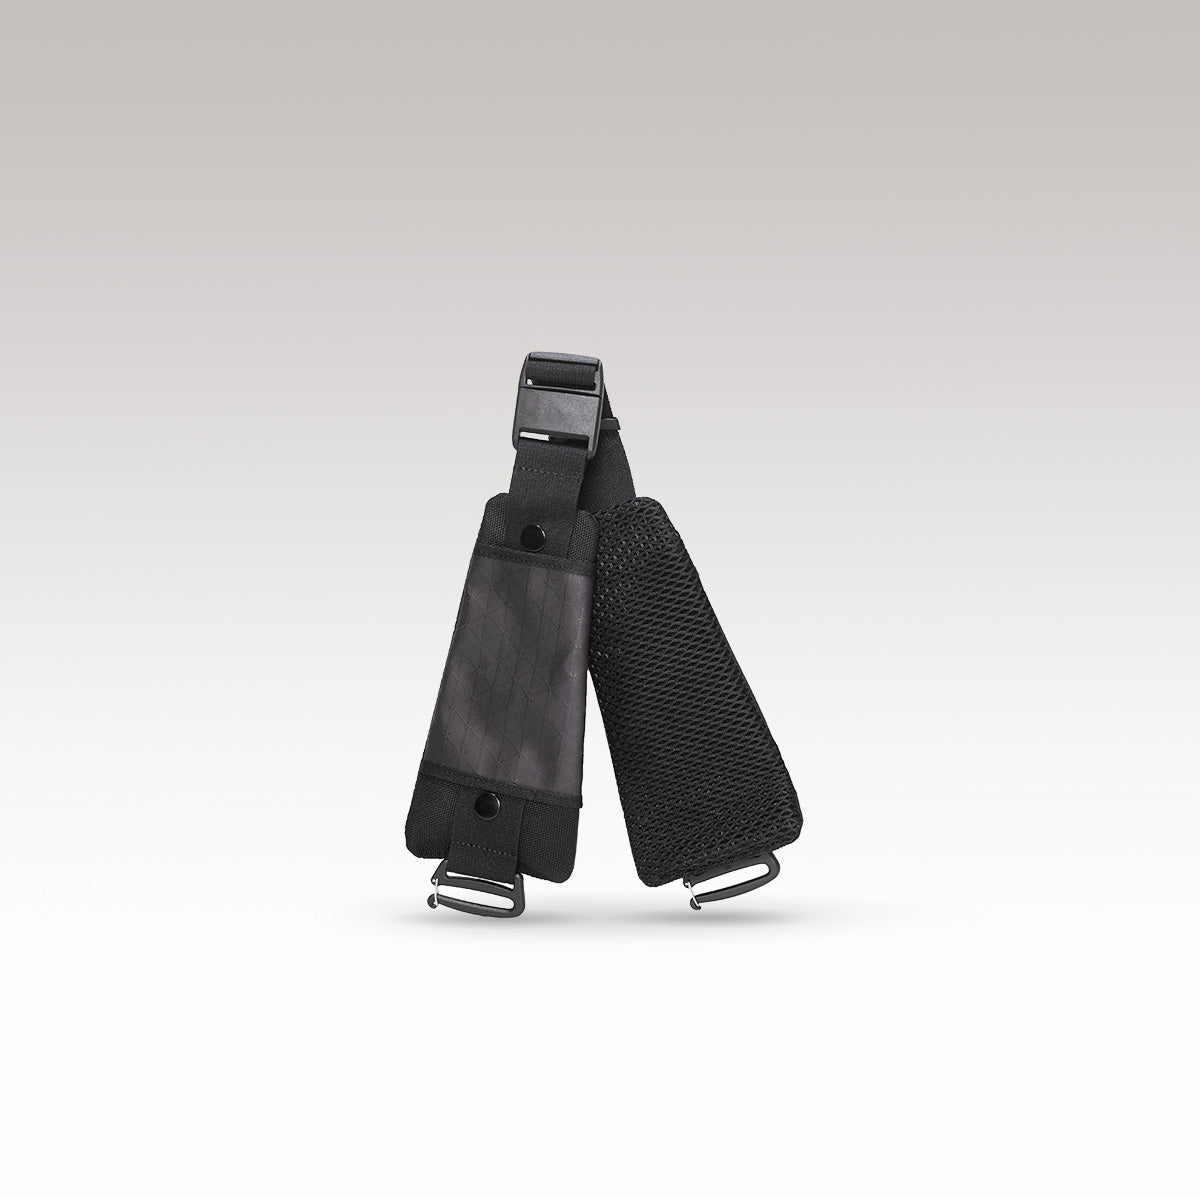 Detachable Waist Belt | RIKR - to be used with 24L, 23L and 20L Backpacks